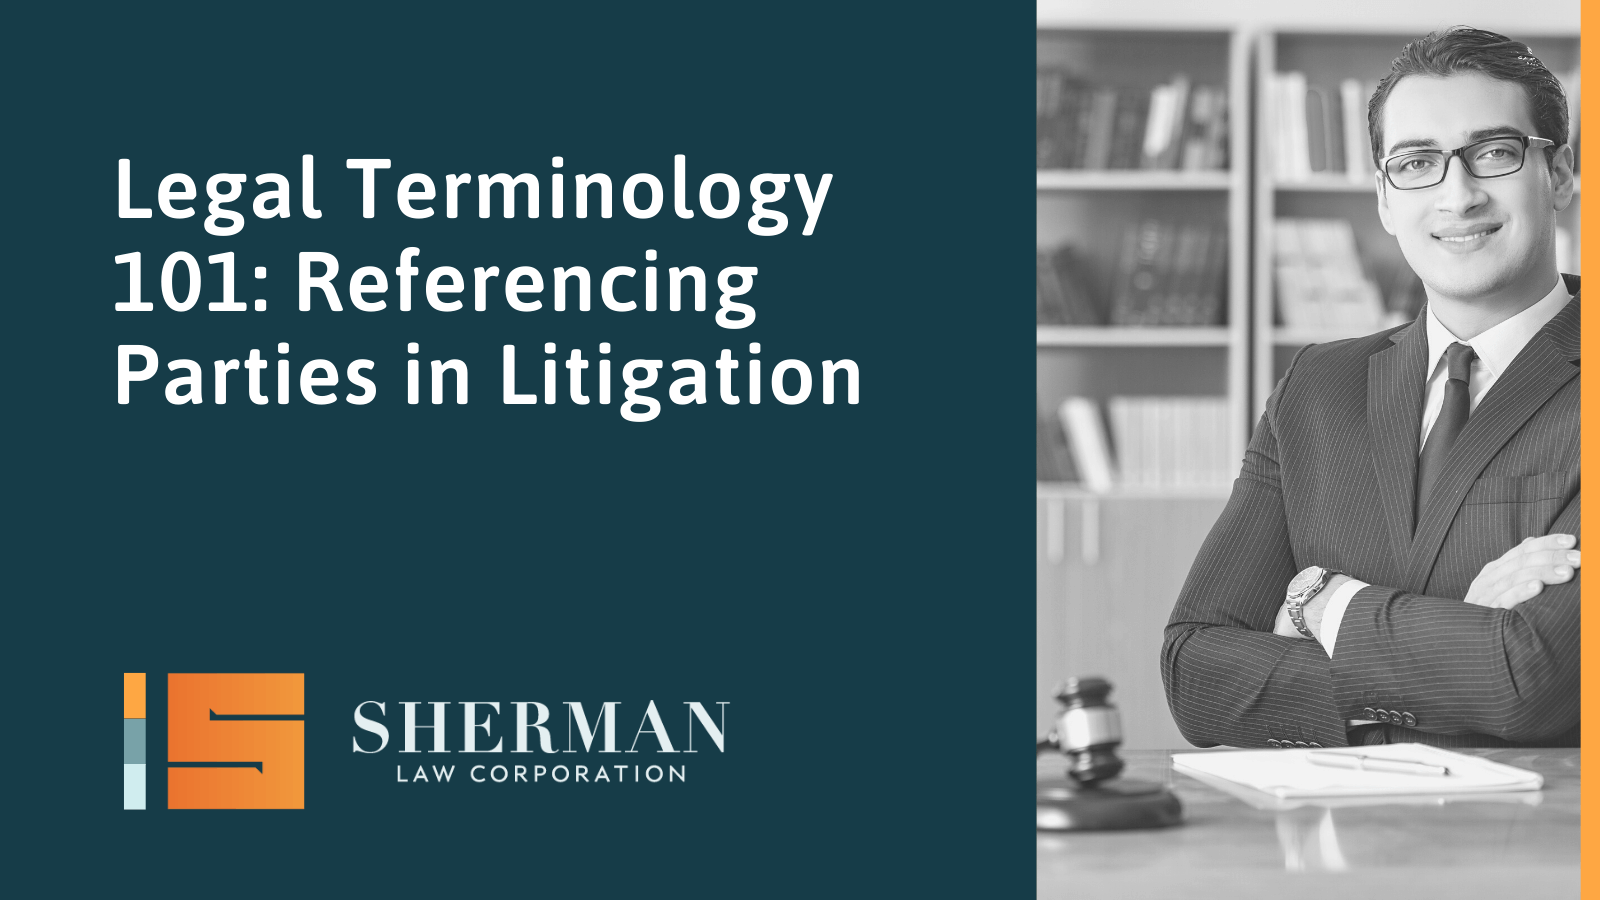 Legal Terminology 101: Referencing Parties in Litigation - california employment lawyer - sherman law corporation